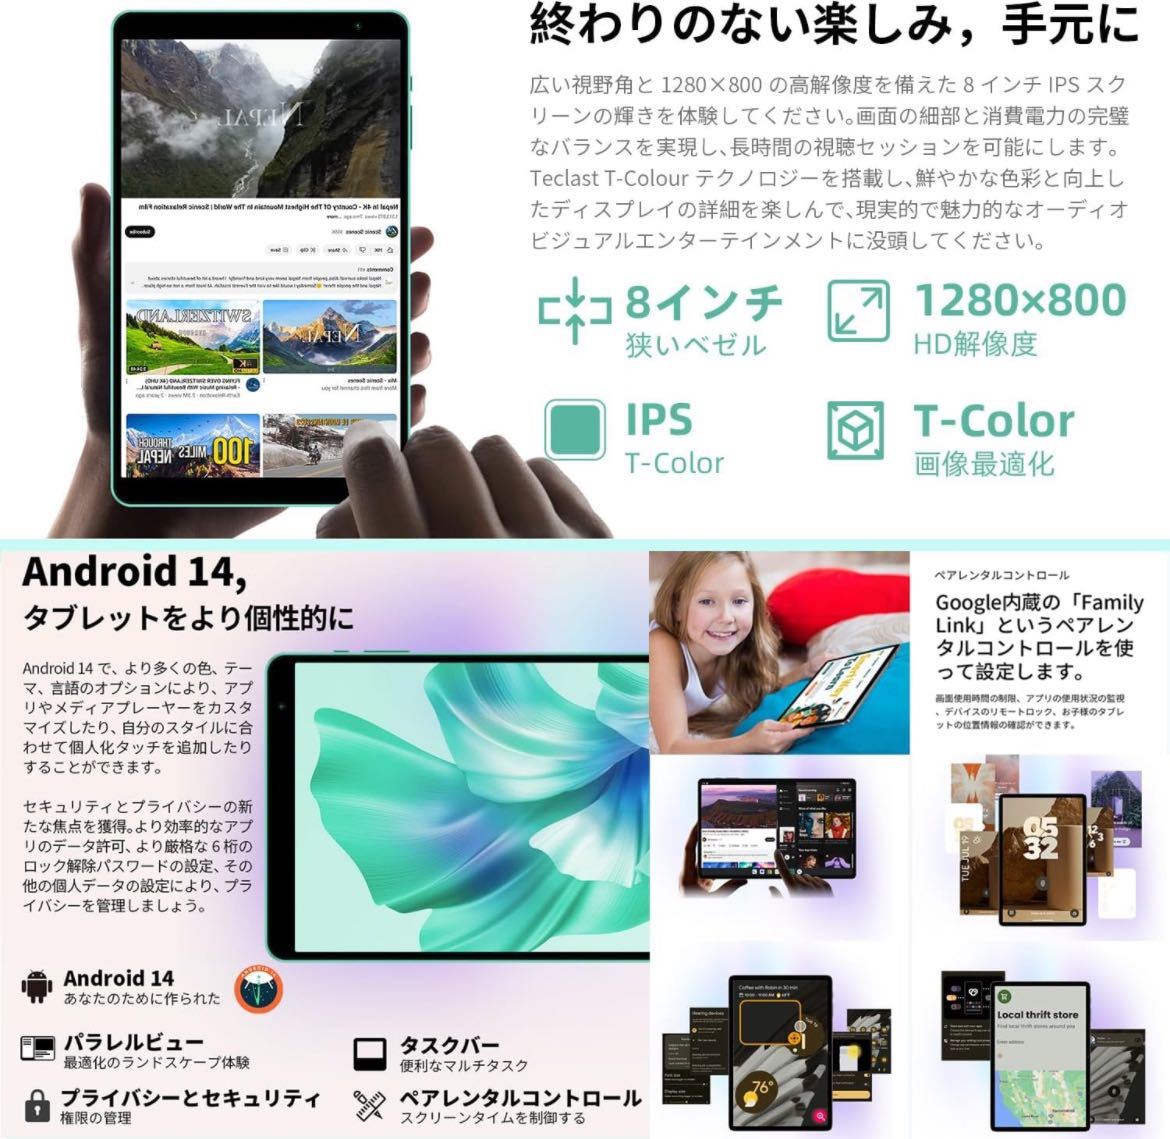 Android 14 タブレット 8インチ新登場 アンドロイド タブレット 8インチ wi-fiモデル、10GB+64GB+1TB TF拡張、Widevine L1タブレット_画像3